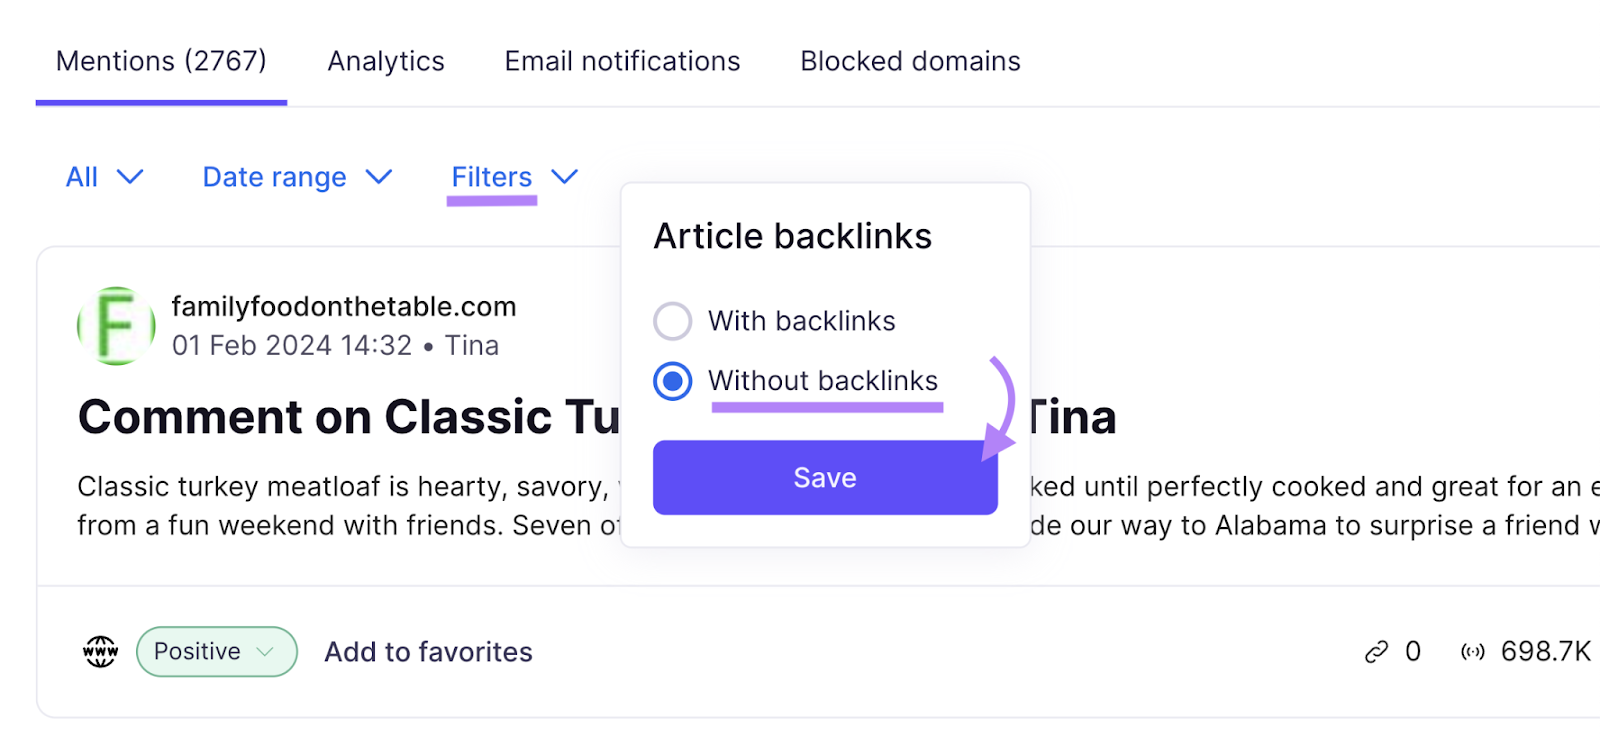 Filtering for articles without backlinks under "Mentions" report in Brand Monitoring app